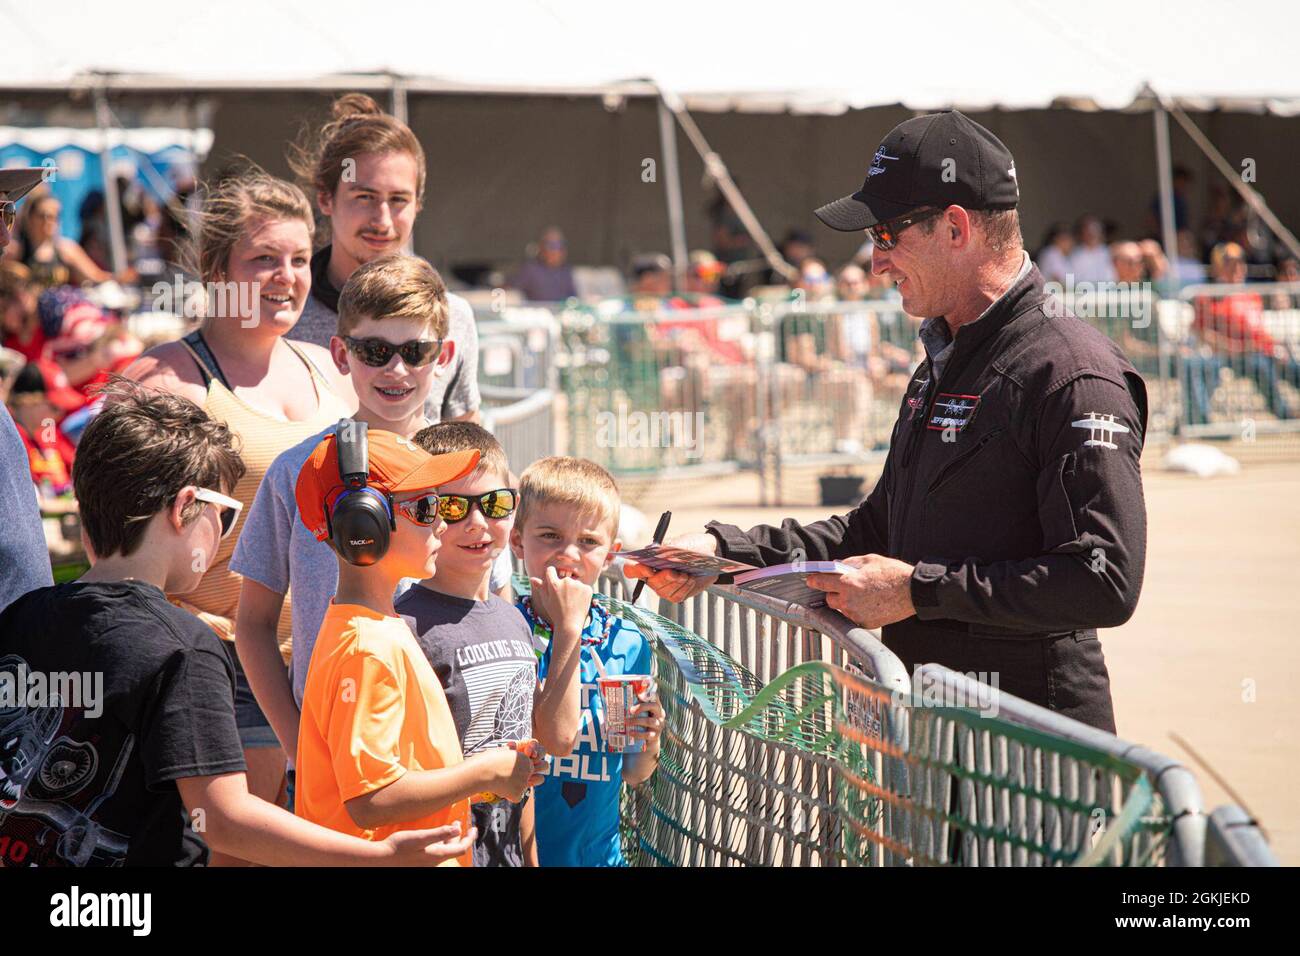 Jeff Boerboon, the pilot of the YAK-110 aircraft signs autographs after his performance at the Speed of Sound Airshow at Rosecrans Memorial Airport in St. Joseph, Missouri, May 1, 2021. The Yak-110 is two Yak-55 aircraft connected together with a J-85 jet engine welded to the bottom. The air show was hosted by the 139th Airlift Wing, and city of St. Joseph to thank the community for their support. The air show committee estimated around 30,000 people attended during the weekend performances in which the United States Air Force Thunderbirds Air Demonstration Squadron were featured. Stock Photo